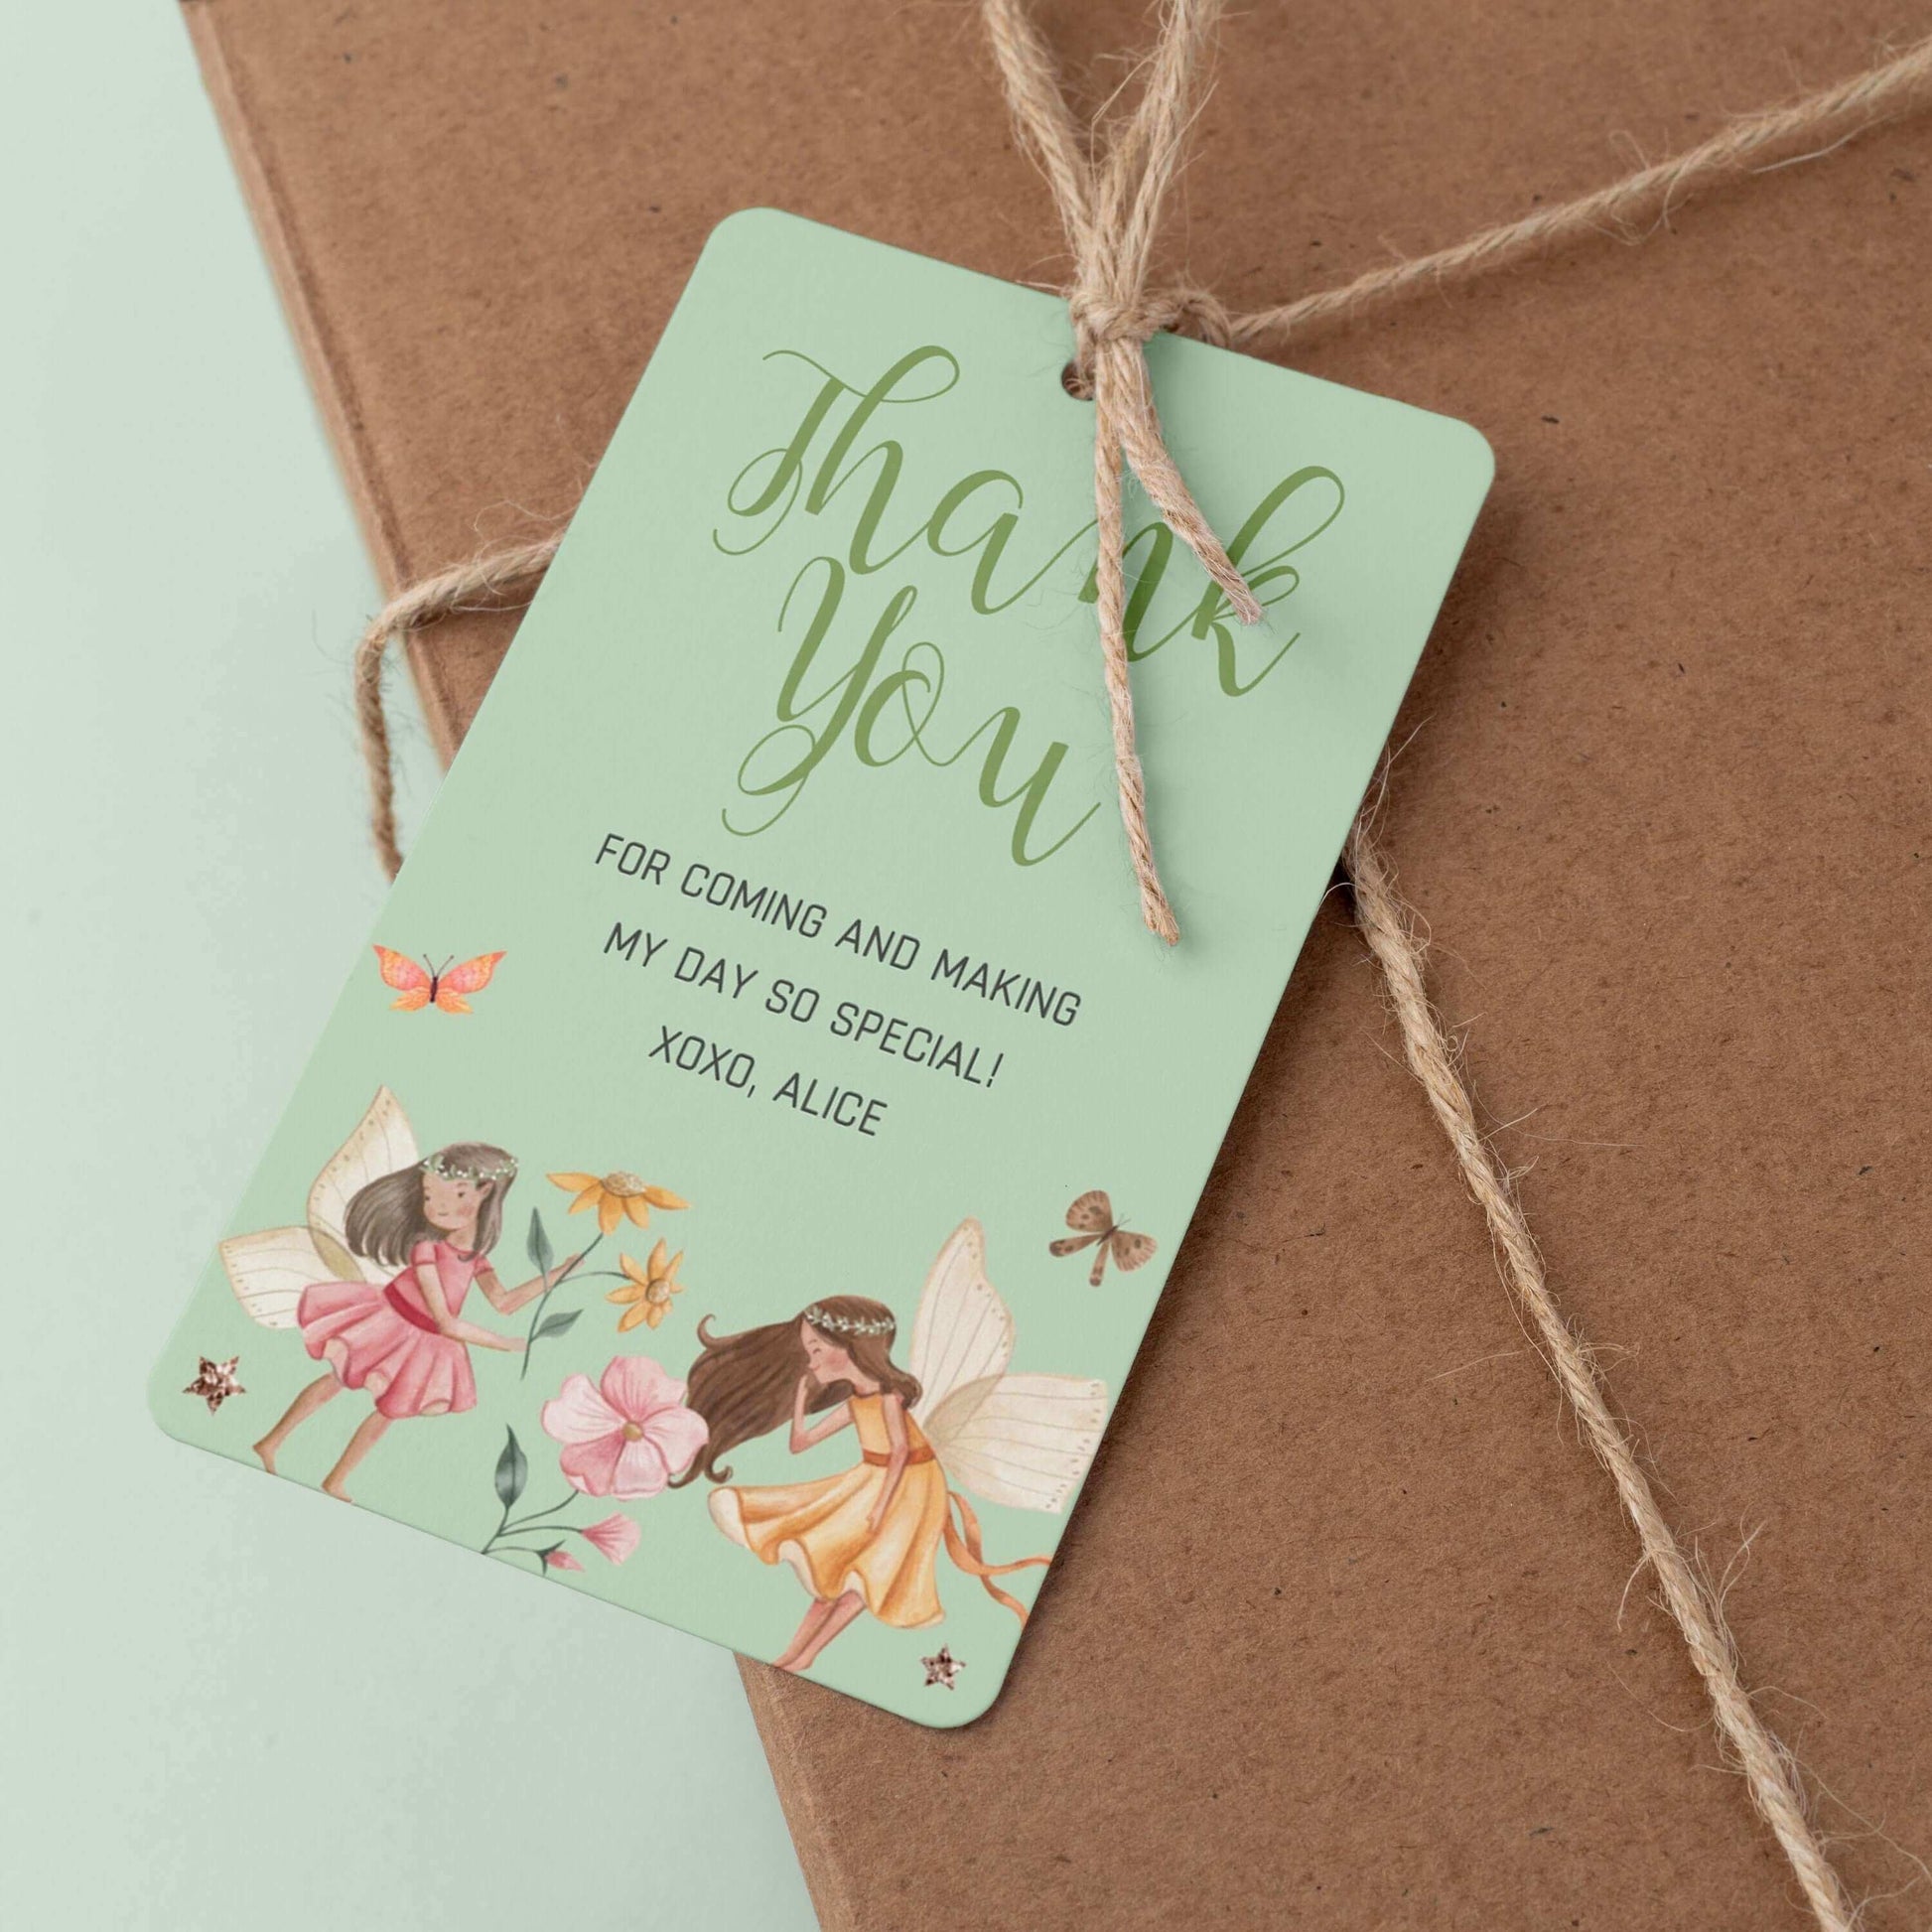 Editable Wildflower Fairies Sage Thank You Tag, Printable Fairy Birthday Party Decorations, Wildflower Favor Tags REF017 - Digitally Printables